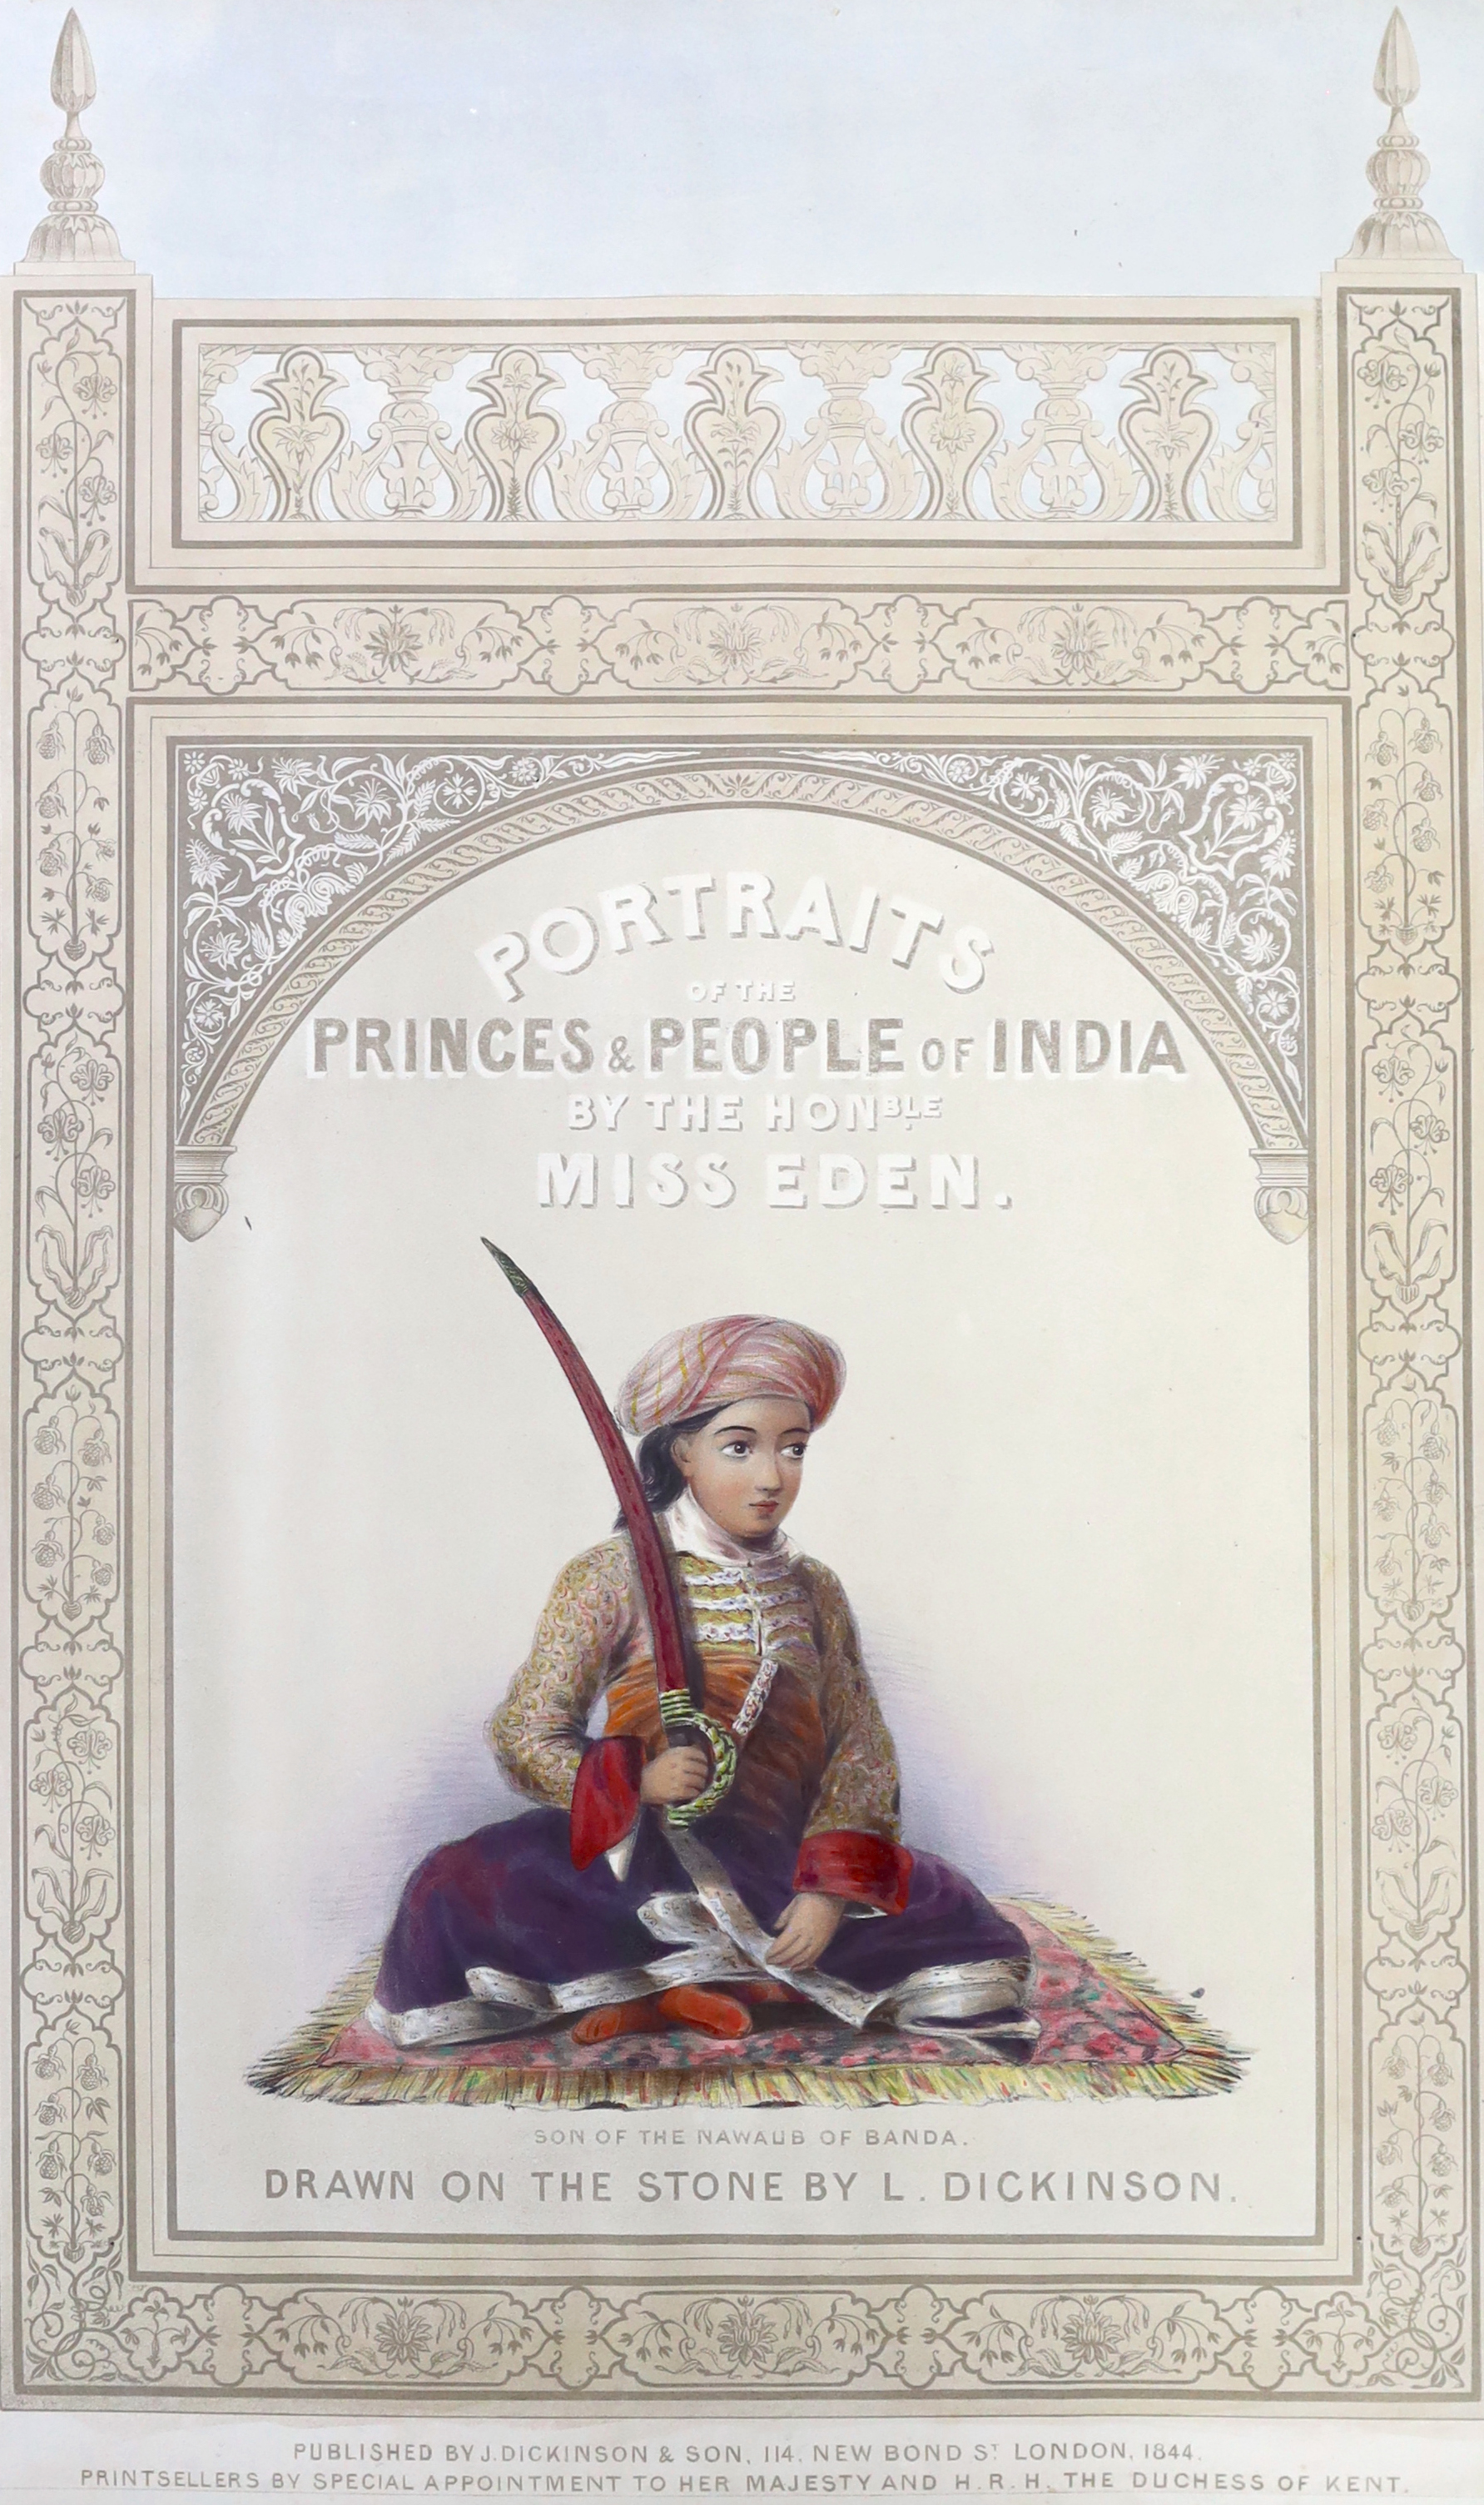 Emily Eden (1797-1869) - PORTRAITS OF THE PRINCES & PEOPLE OF INDIA.